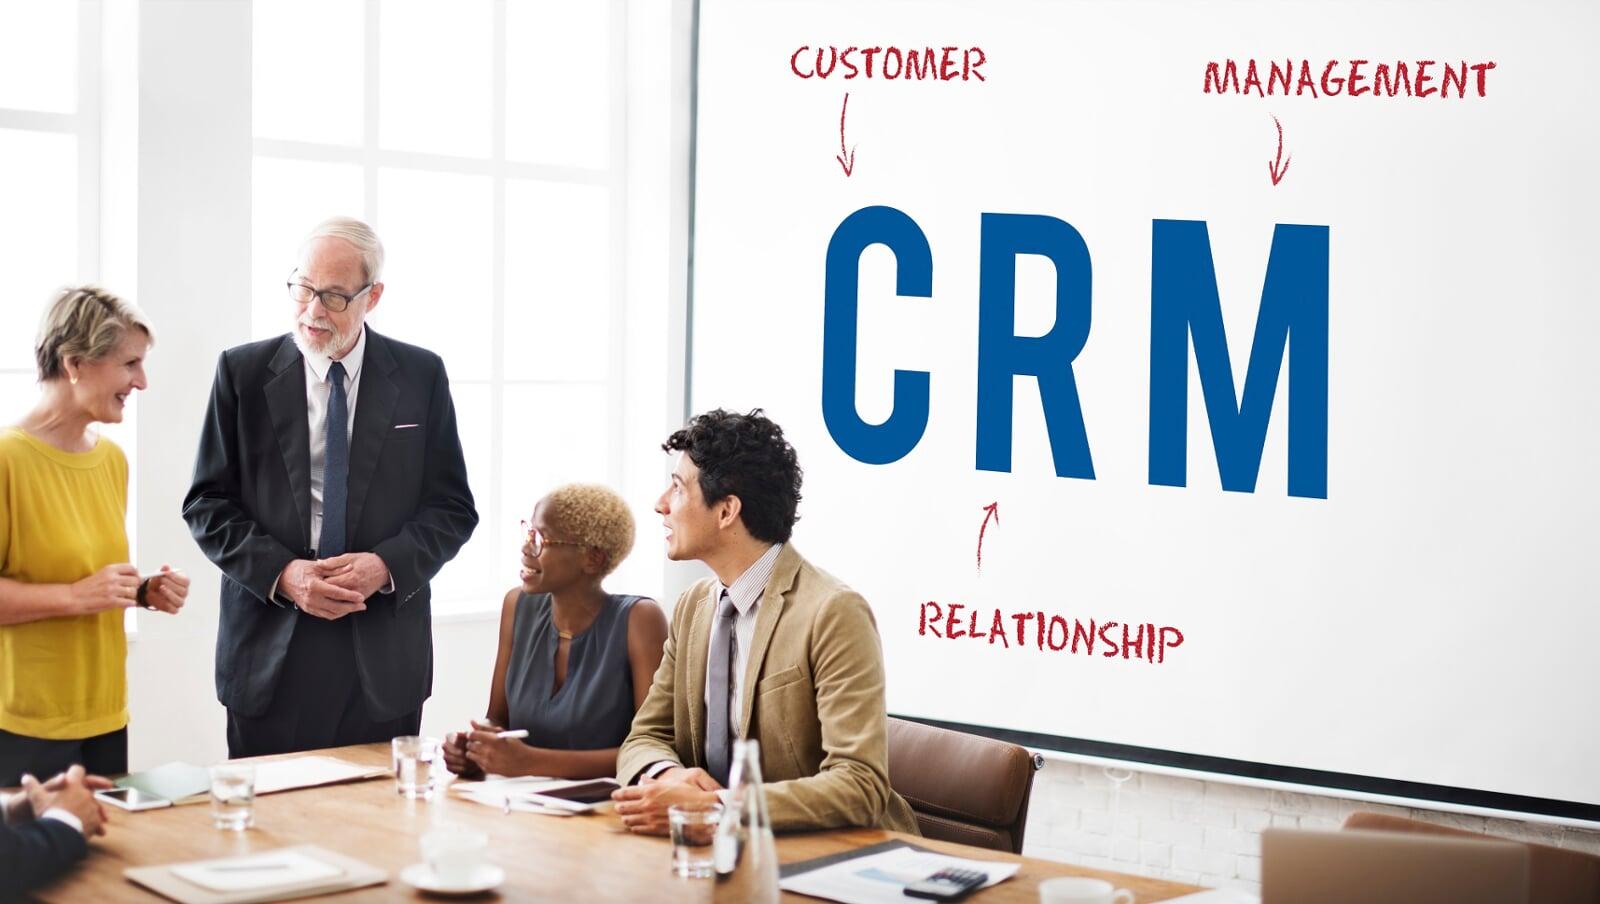 Customer Relationship Management (CRM) systems, a current requirement for service providers such as freight forwarders